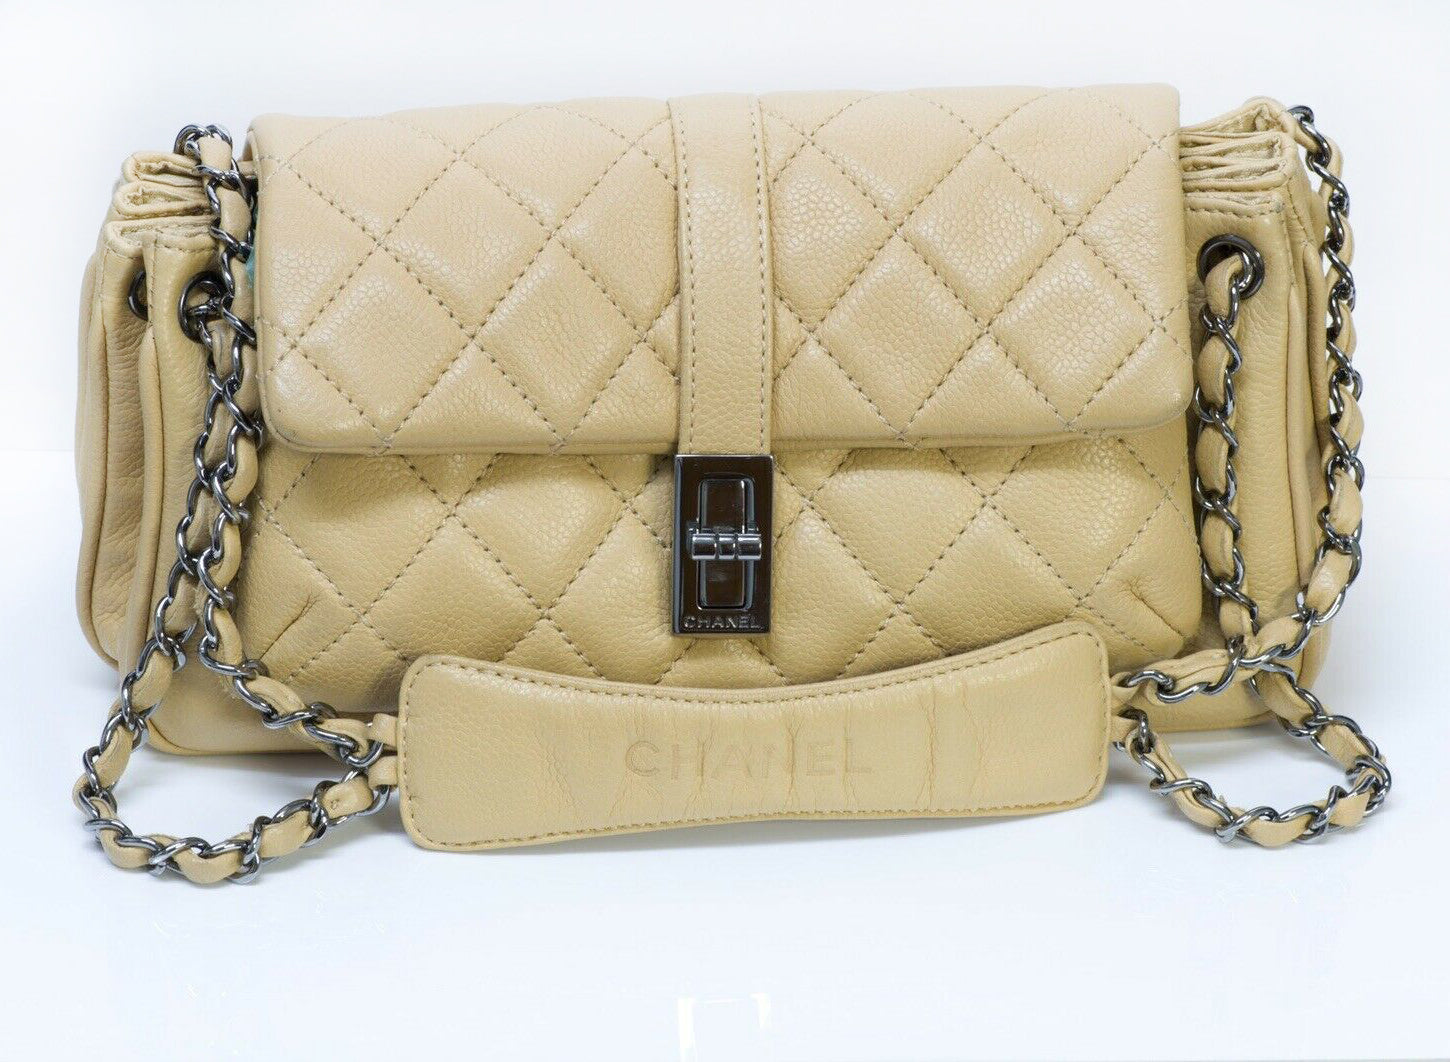 Chanel Louis Vuitton Gucci Handbags to Complement your Wardrobe